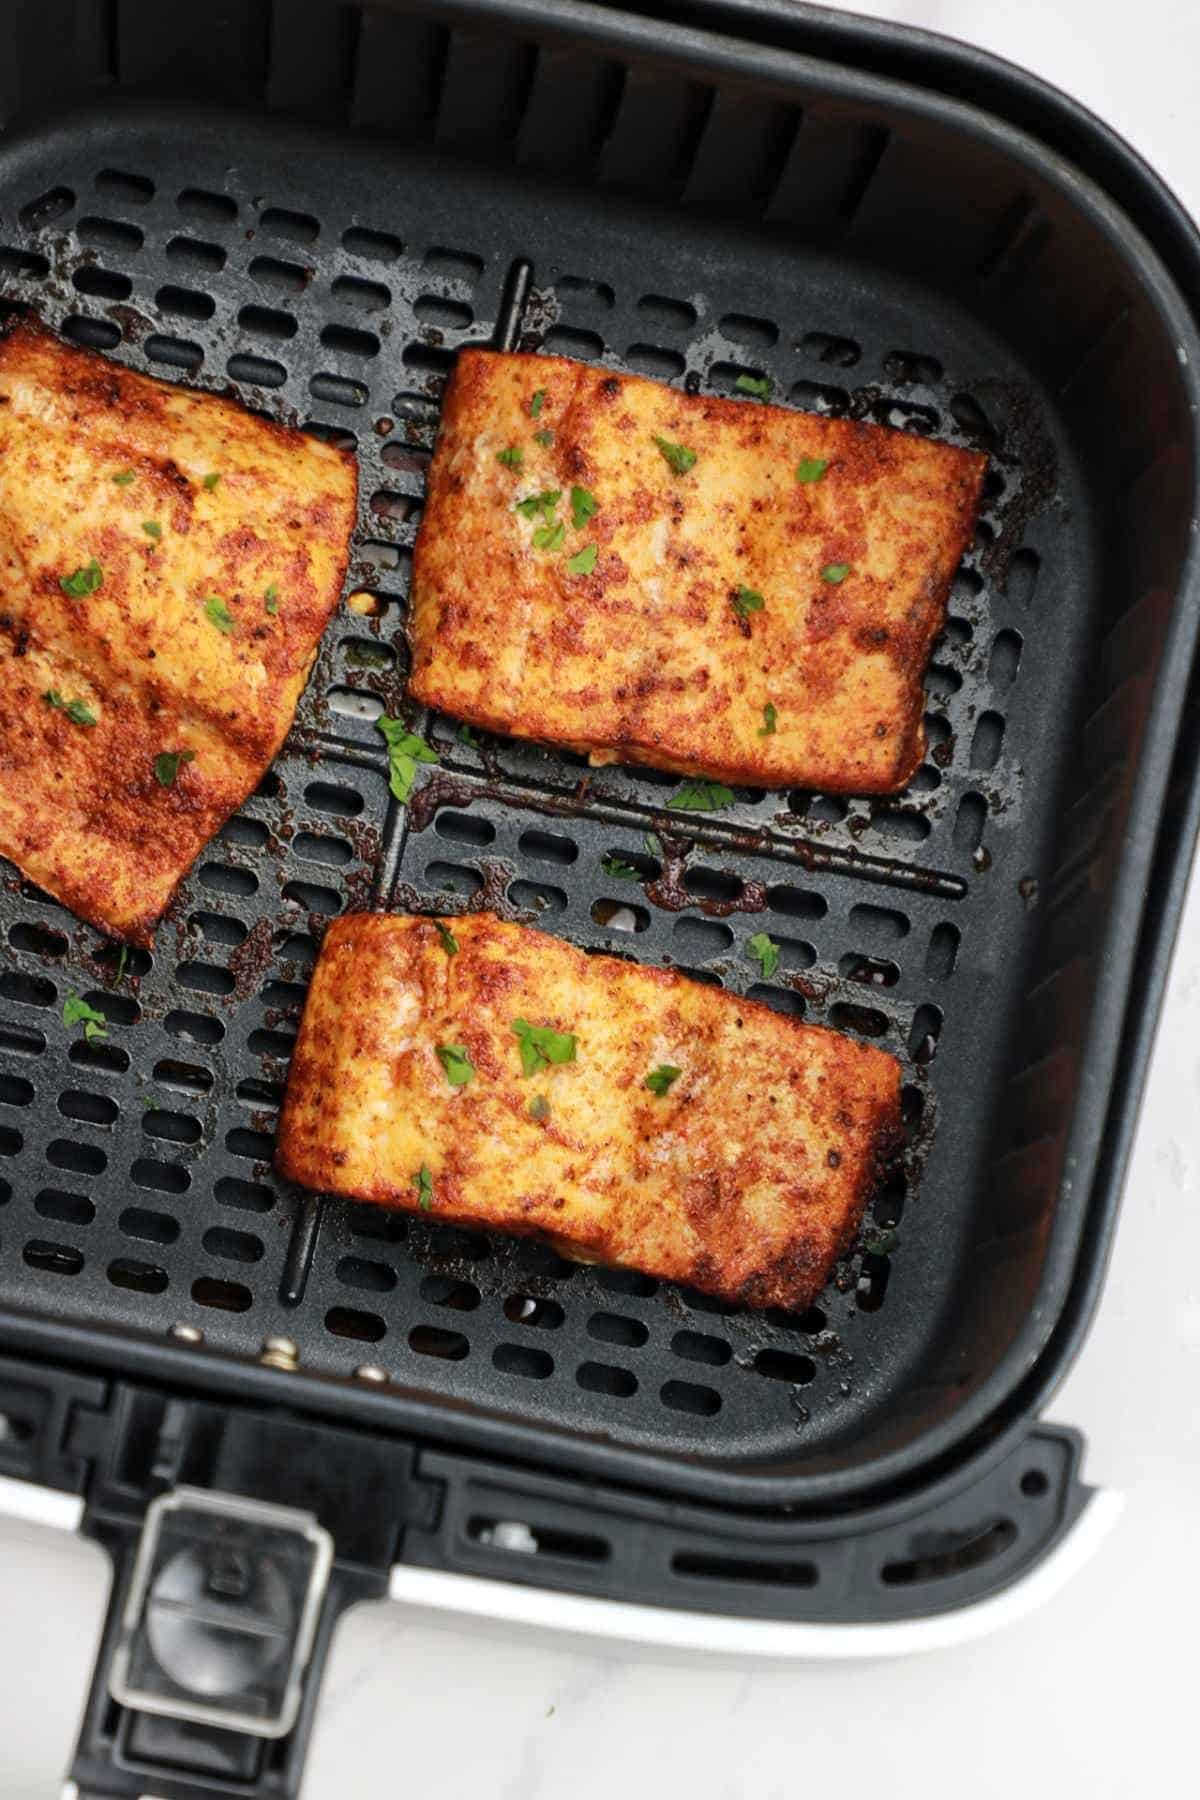 cooked and displayed in air fryer basket.